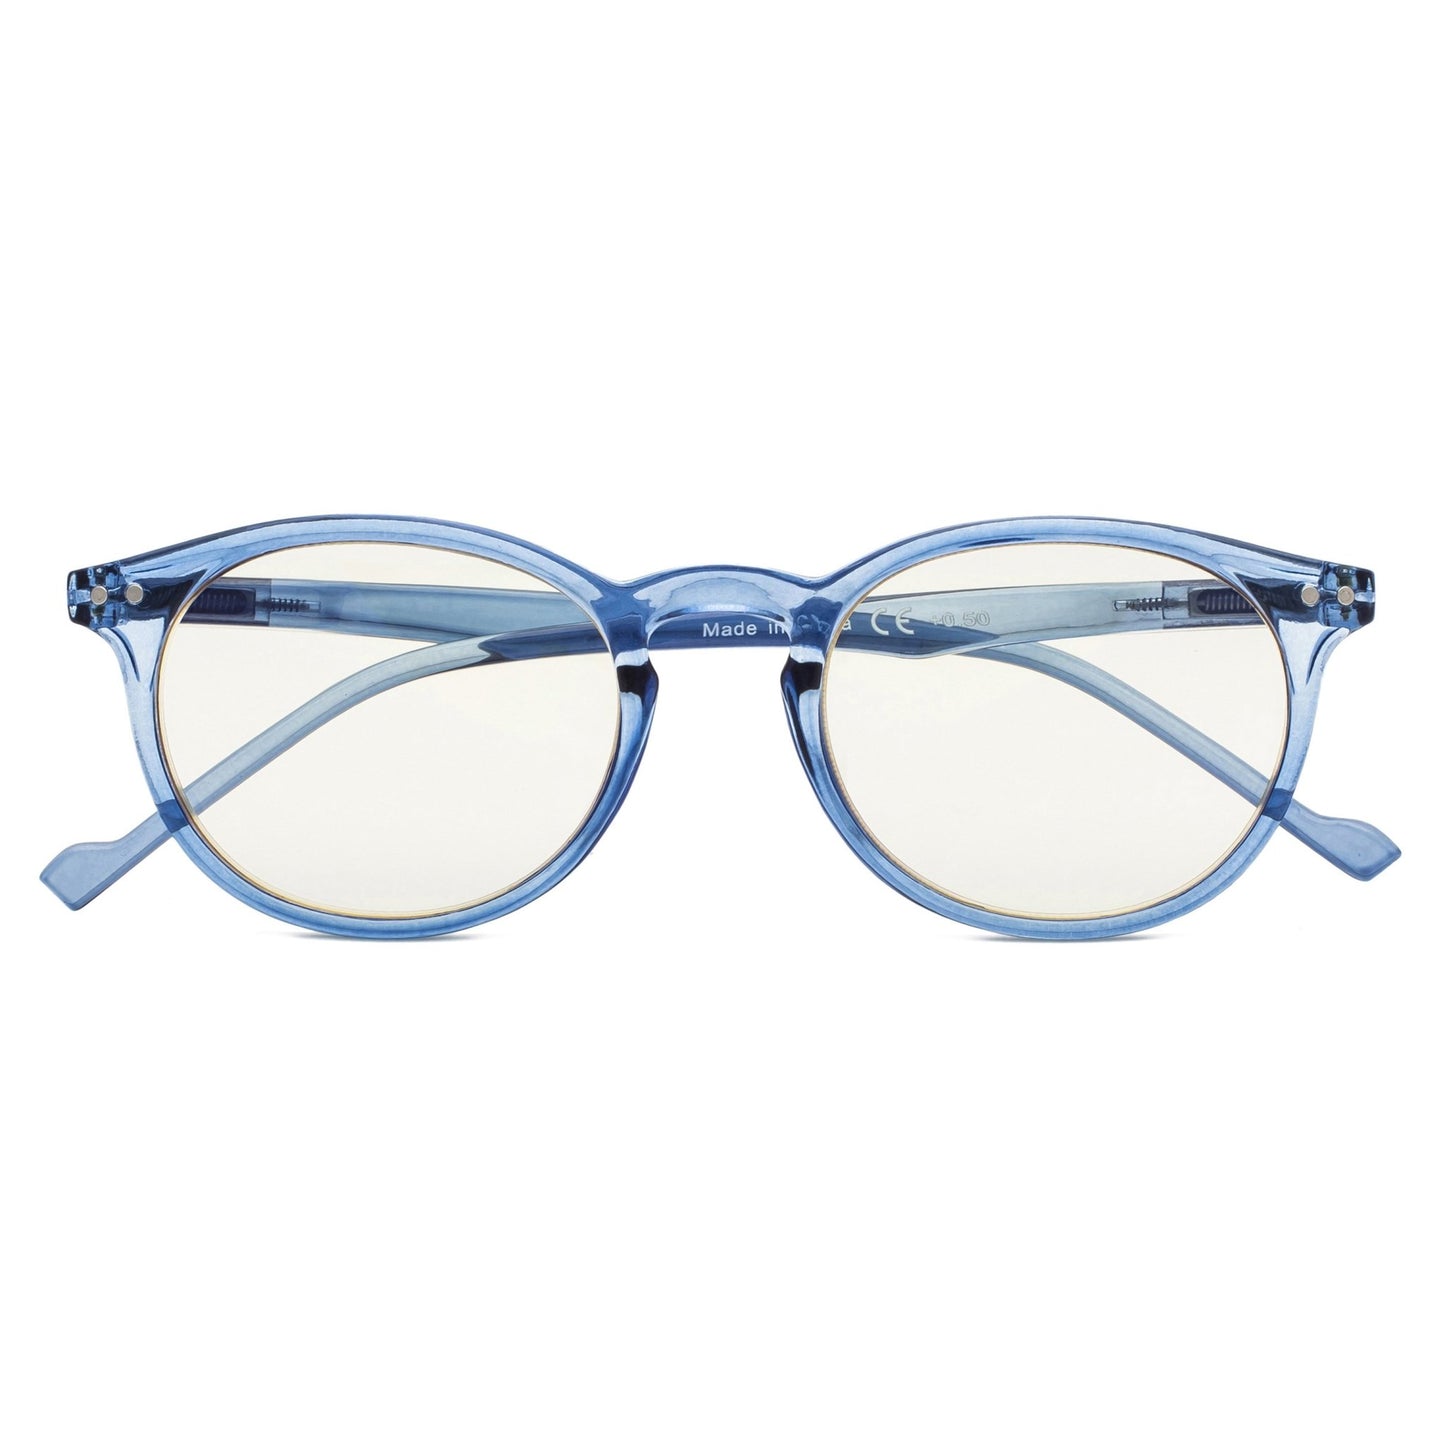 Oval Round Computer Reading Glasses Blue 1-CG071